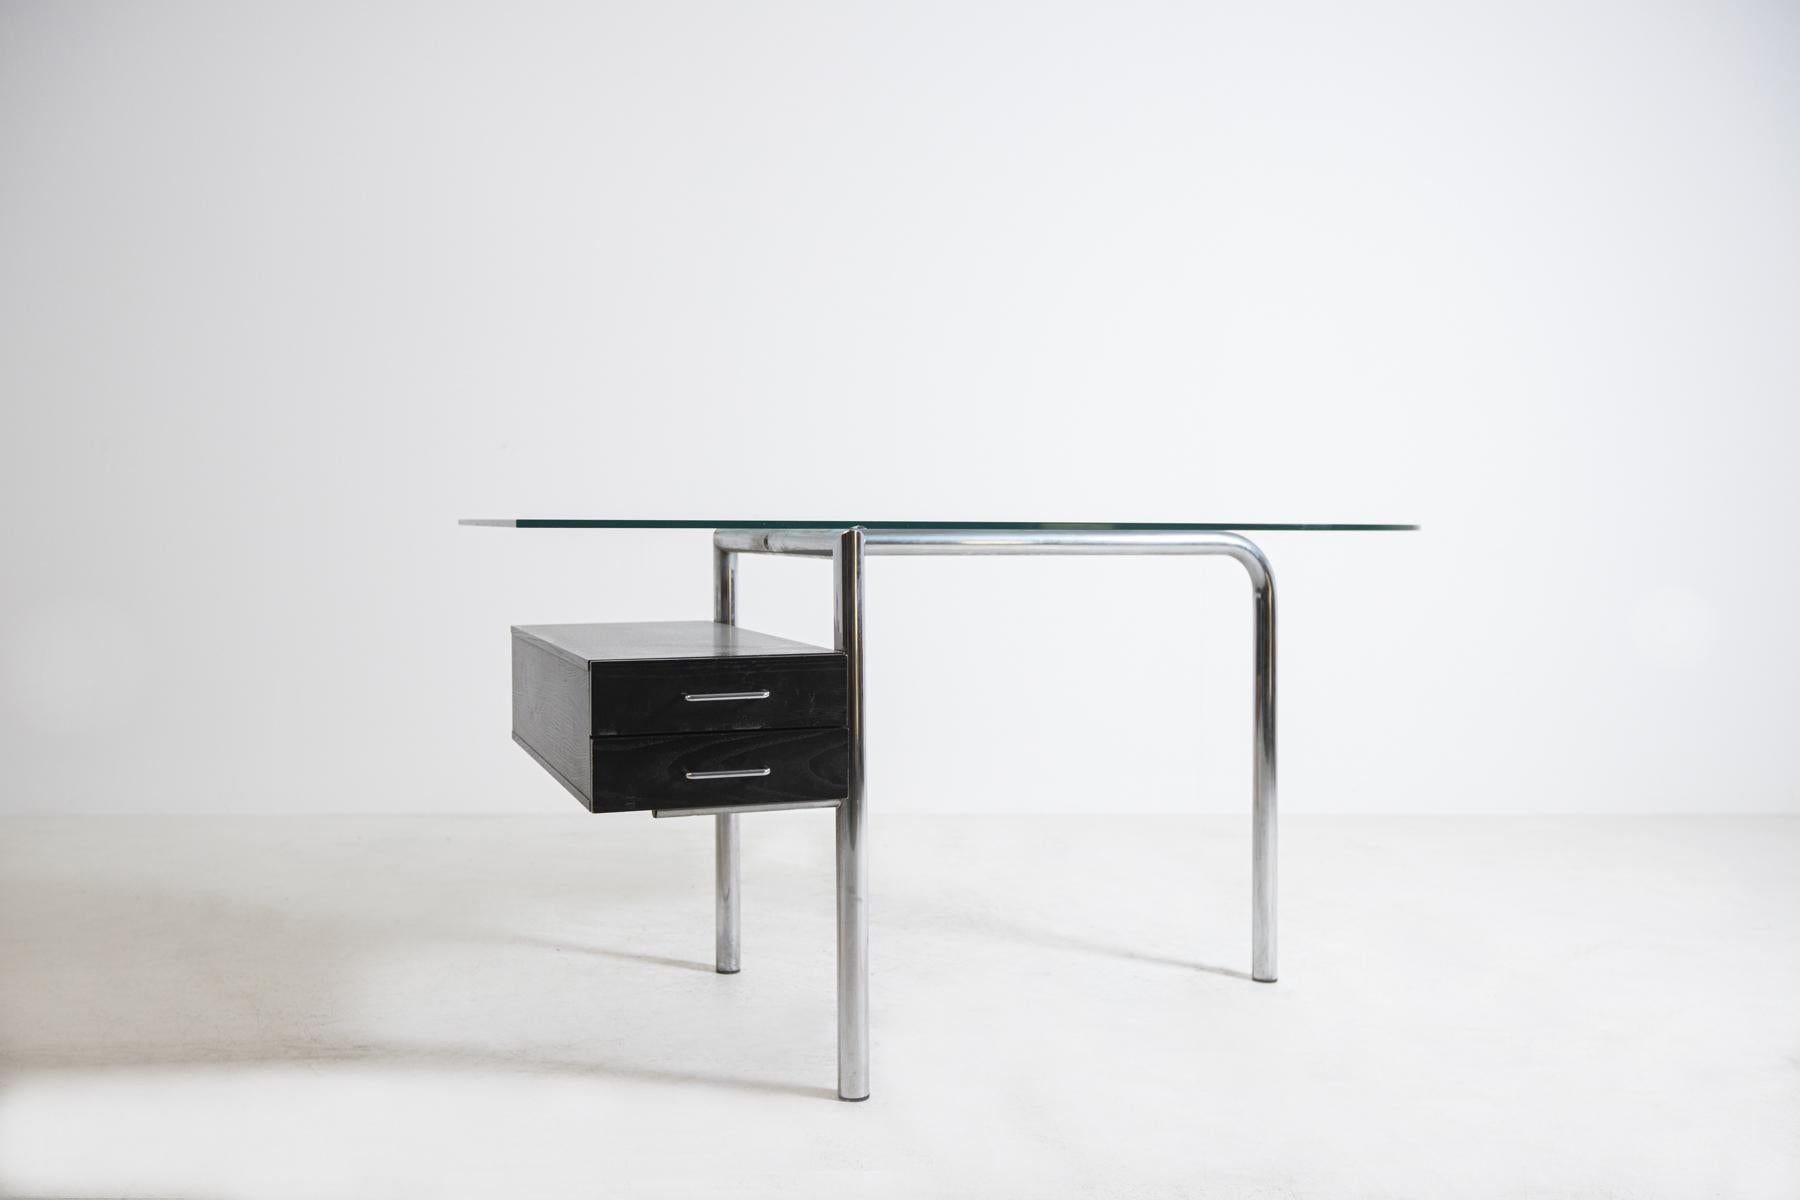 Essential Italian desk from the 1970s, in excellent condition. The desk has a tubular chrome-plated steel frame. Its top is made of thick glass with a shaped form. In the left section there are two elegant black wooden drawers. The drawers open by